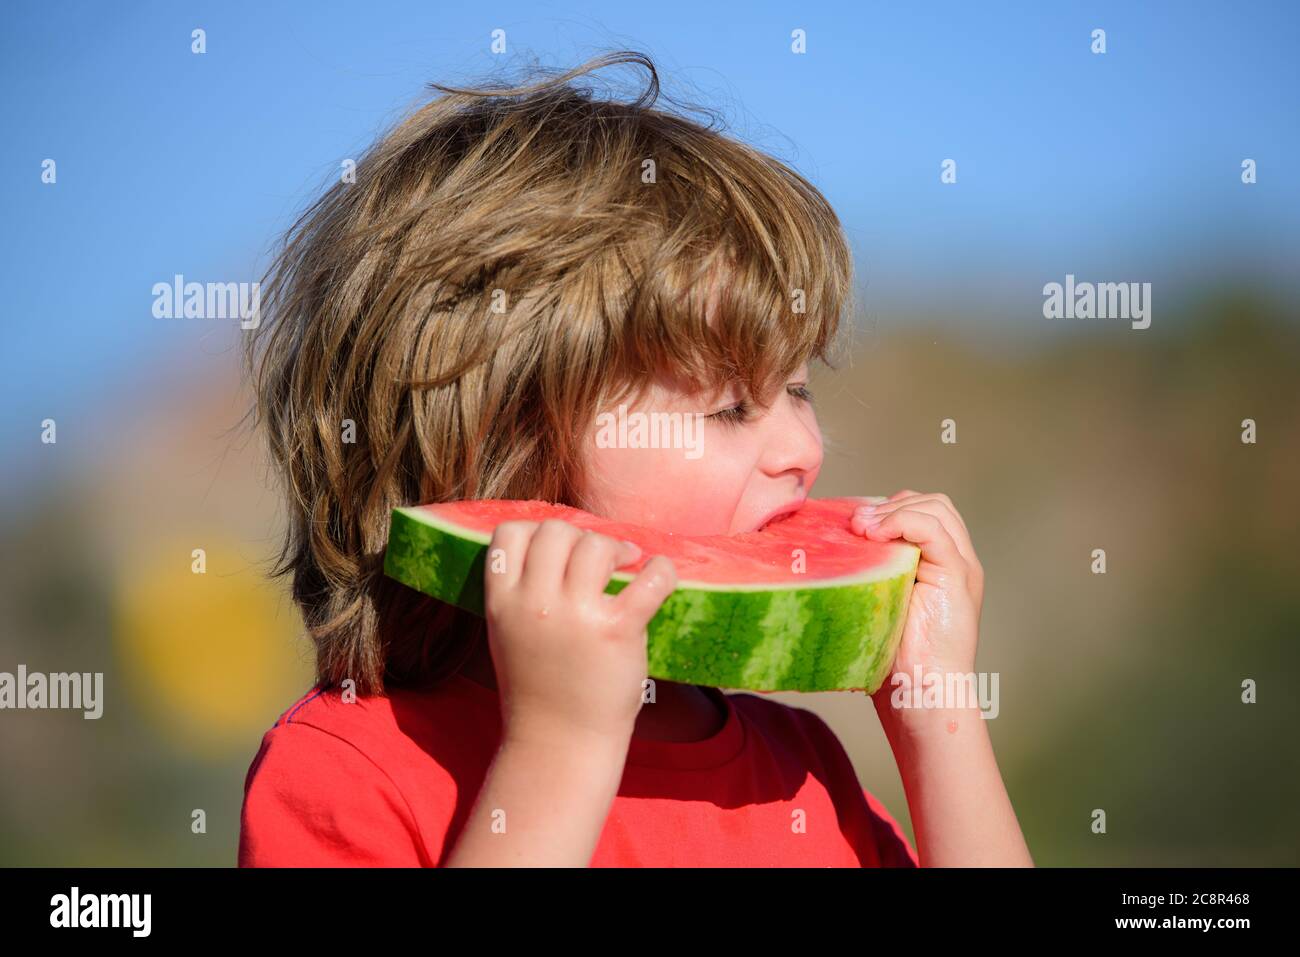 Kid eating watermelon outdoors. Healthy food for child. Stock Photo